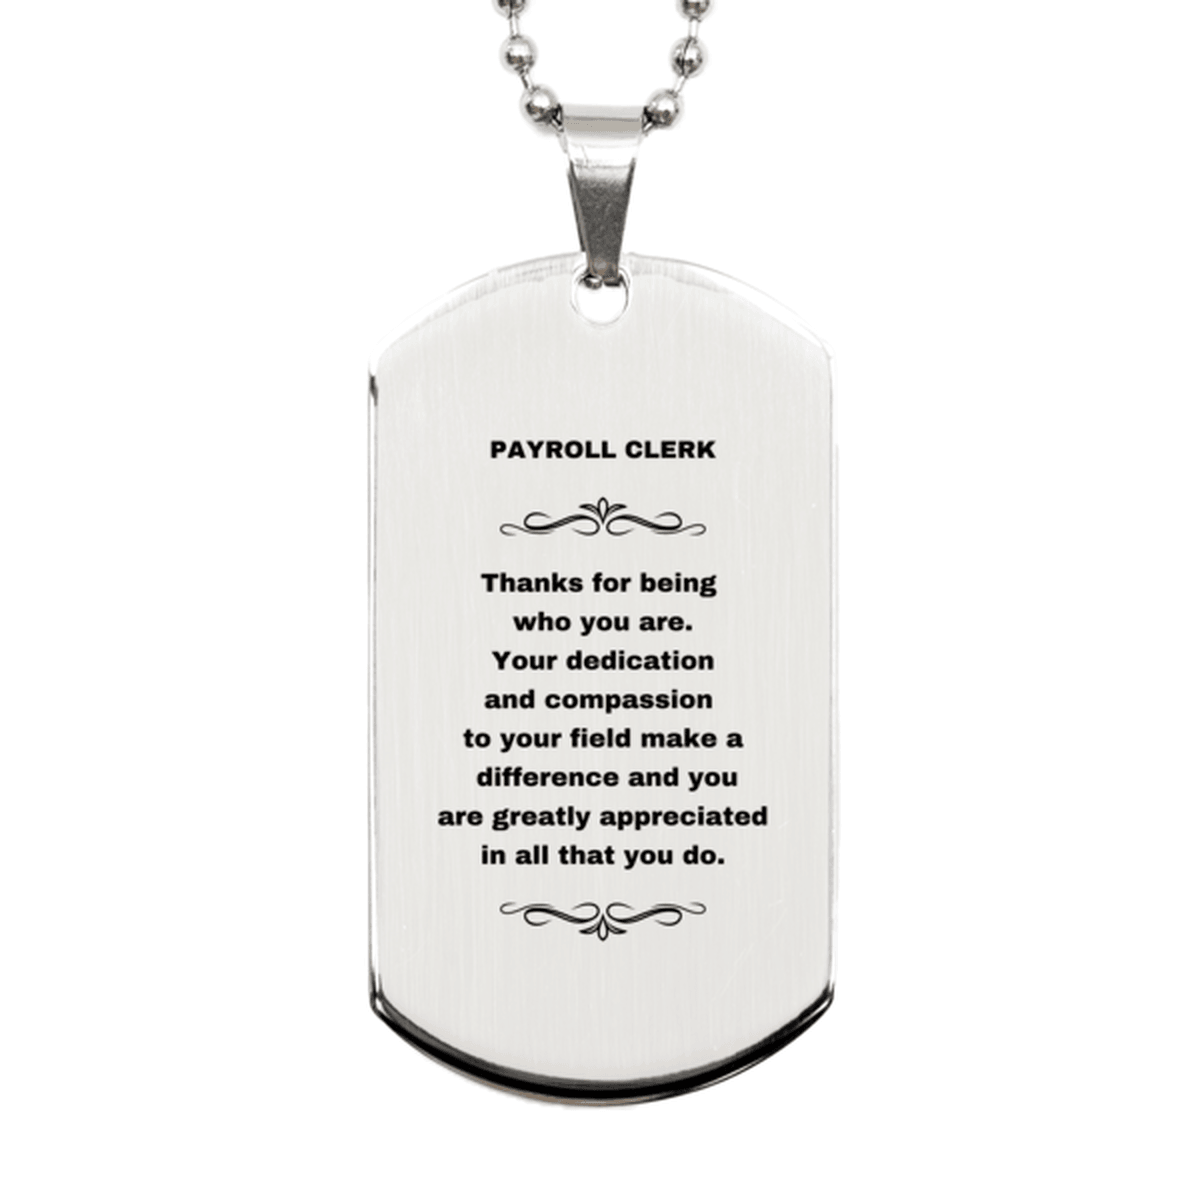 Payroll Clerk Silver Dog Tag Engraved Necklace - Thanks for being who you are - Birthday Christmas Jewelry Gifts Coworkers Colleague Boss - Mallard Moon Gift Shop